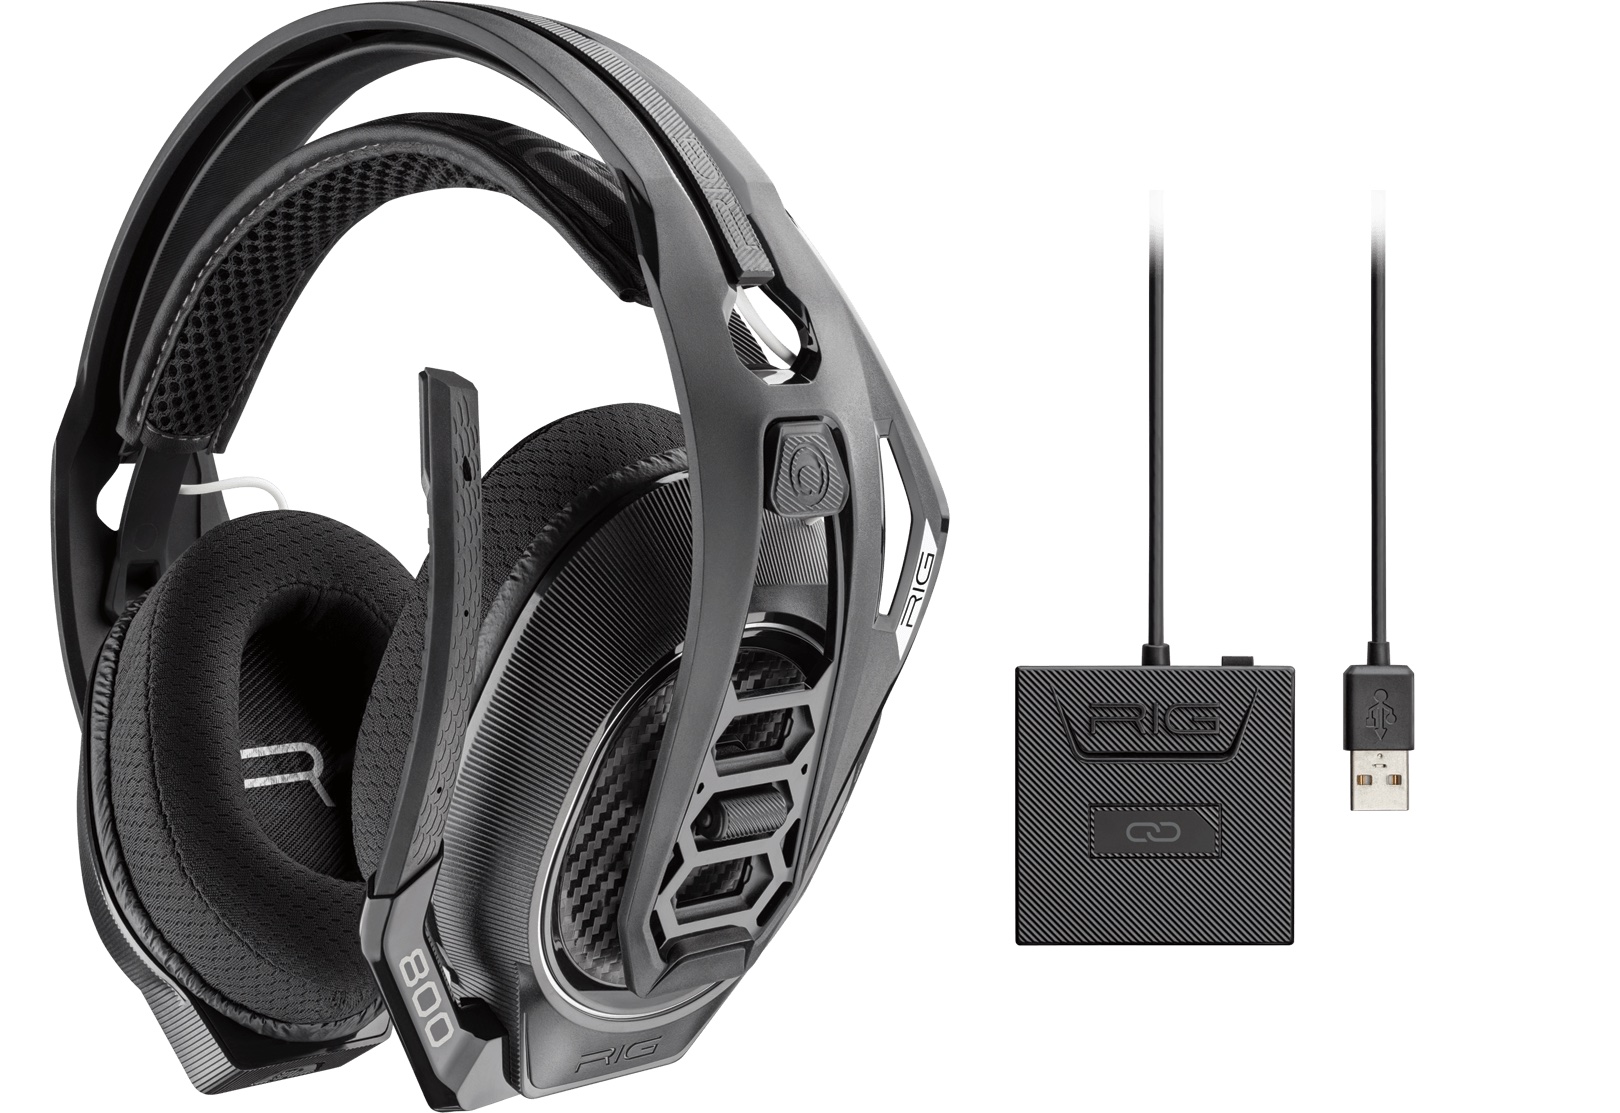 The new Plantronics RIG headsets include a code to unlock Dolby Atmos on the Xbox One.